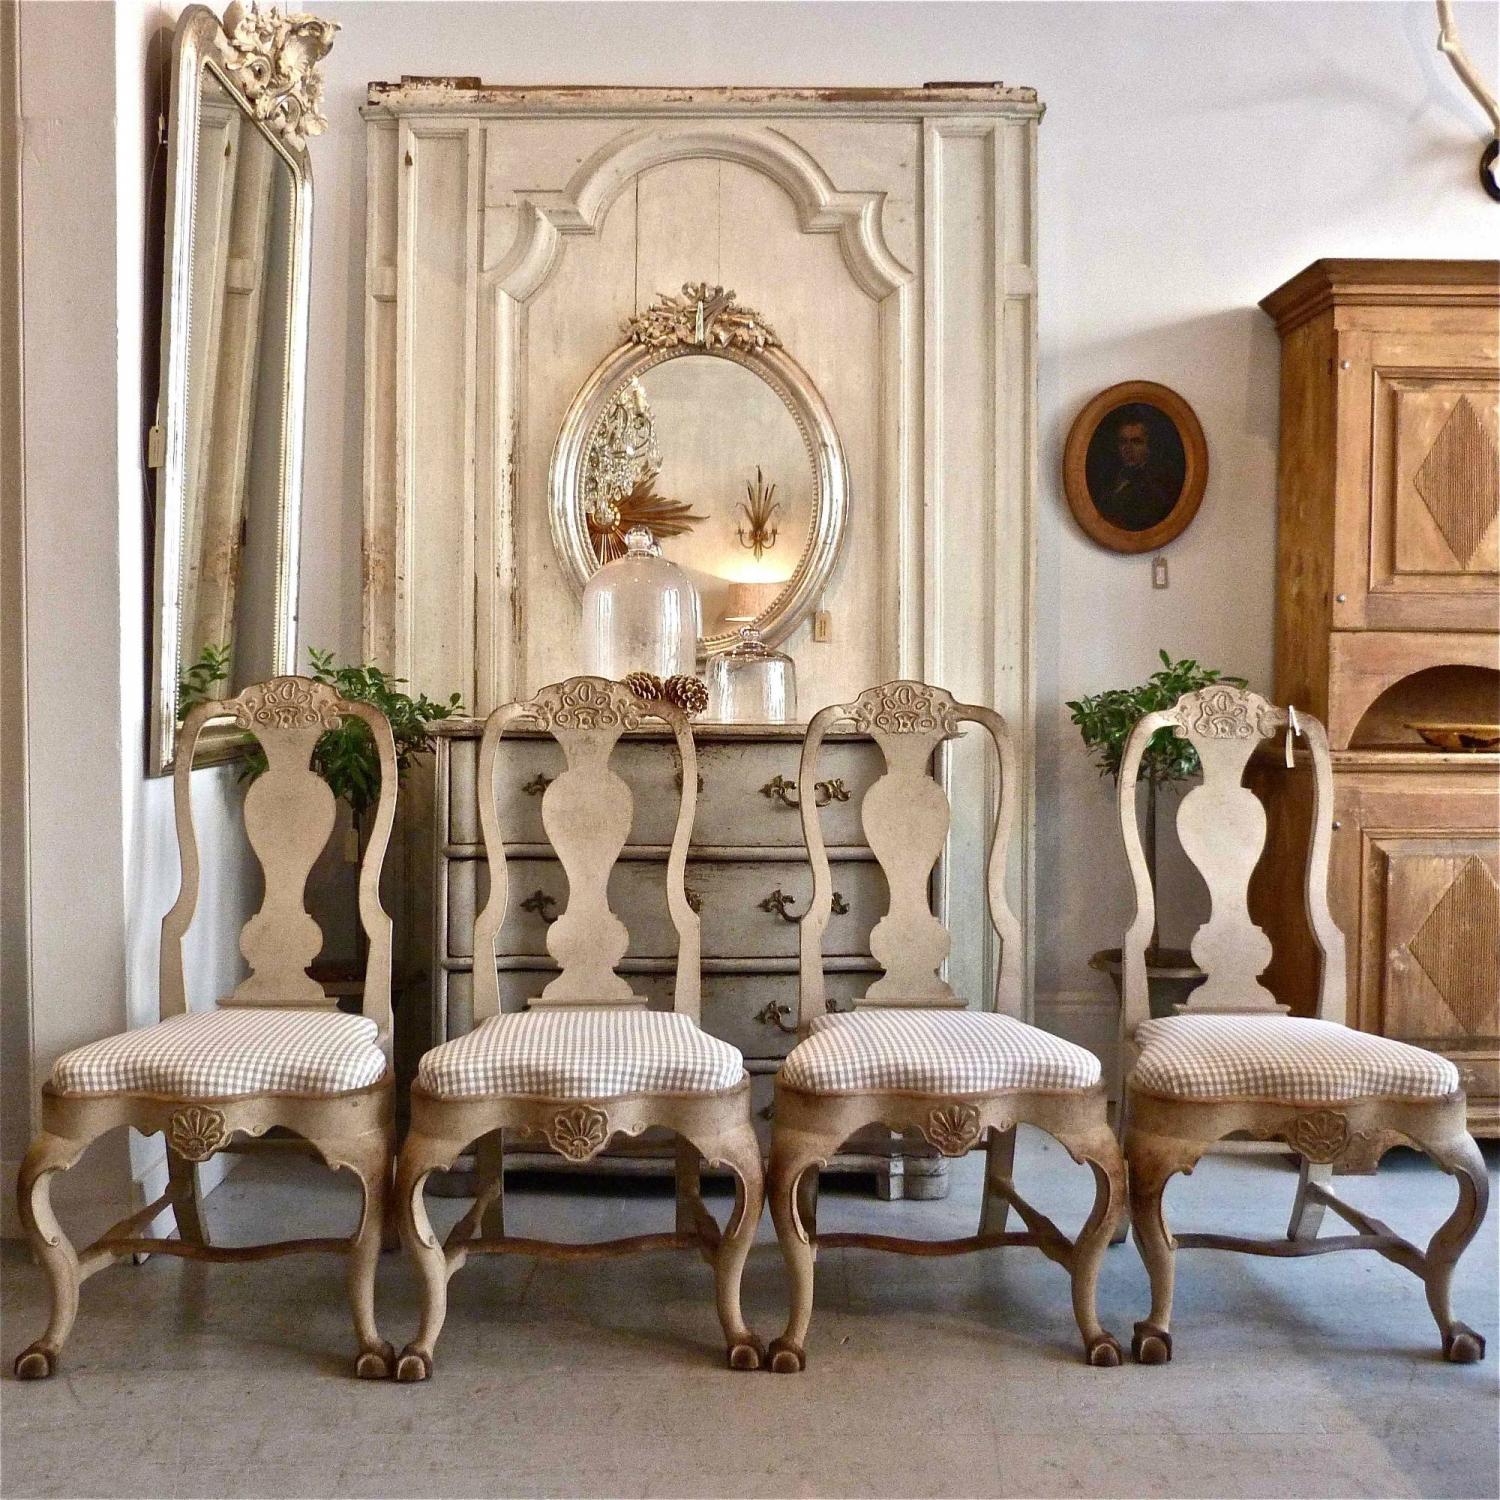 SET OF FOUR 19TH CENTURY SWEDISH ROCOCO STYLE CHAIRS